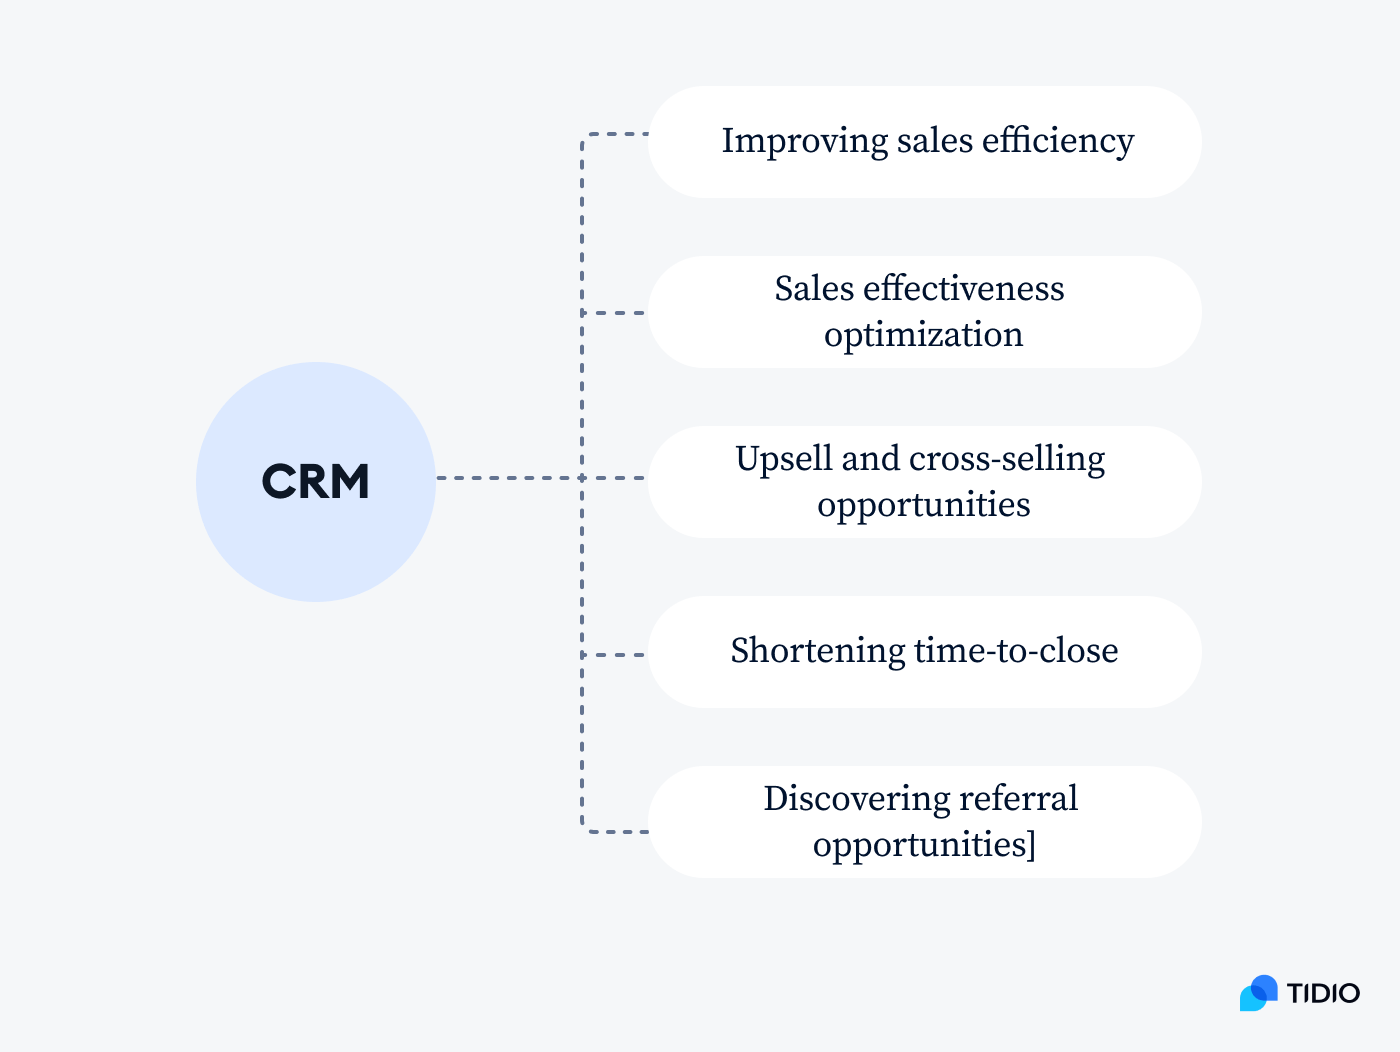 Sync automation tools with your CRM on image